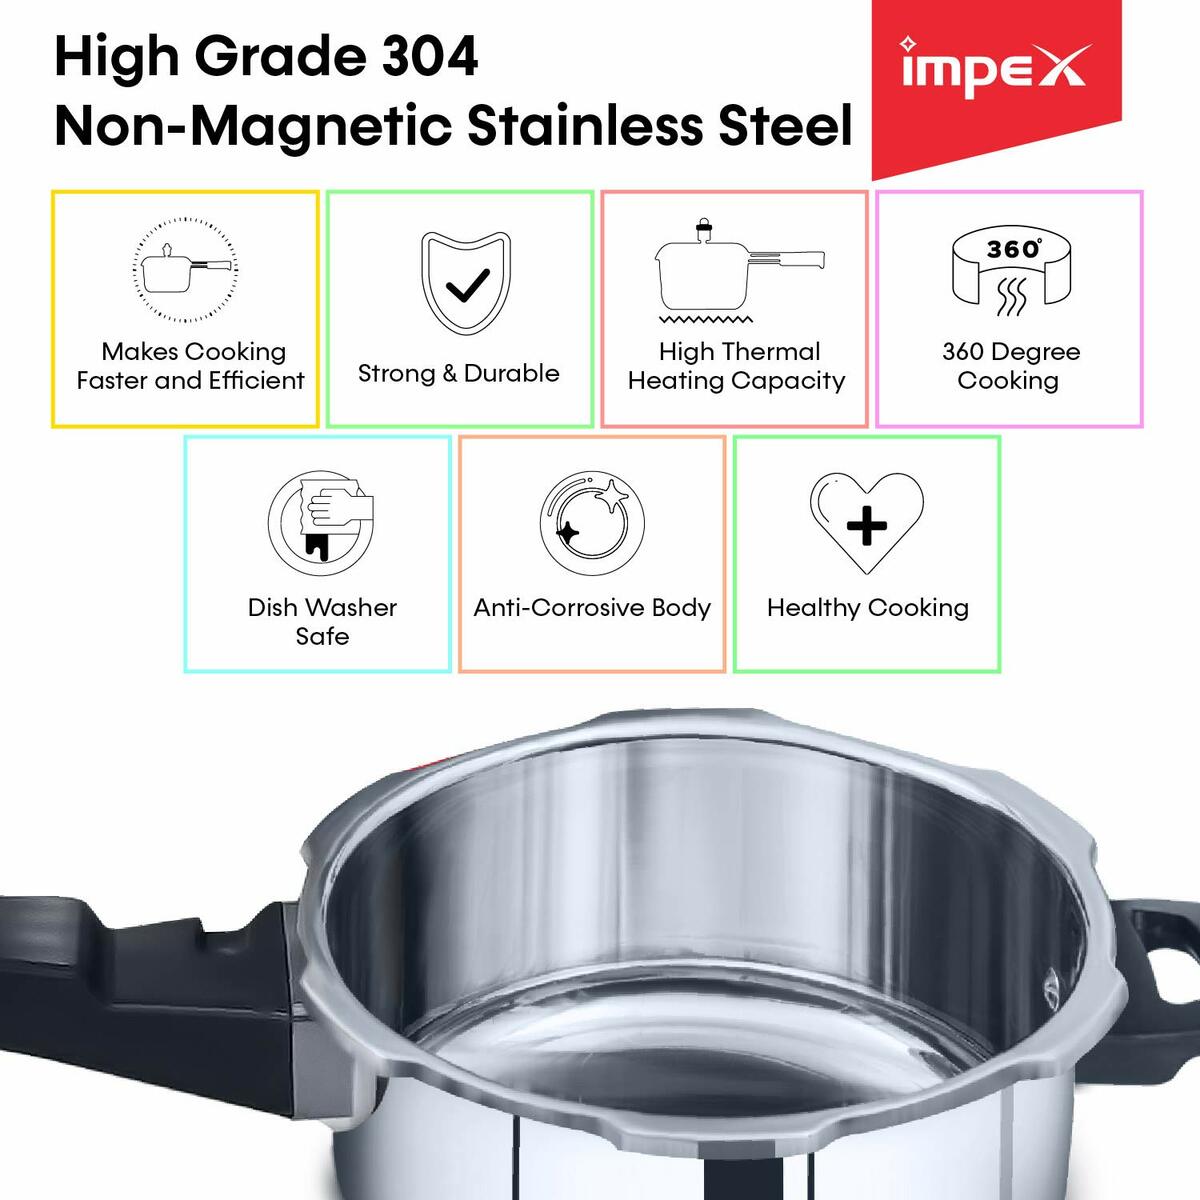 Impex Pressure Cooker EP 5Ltr